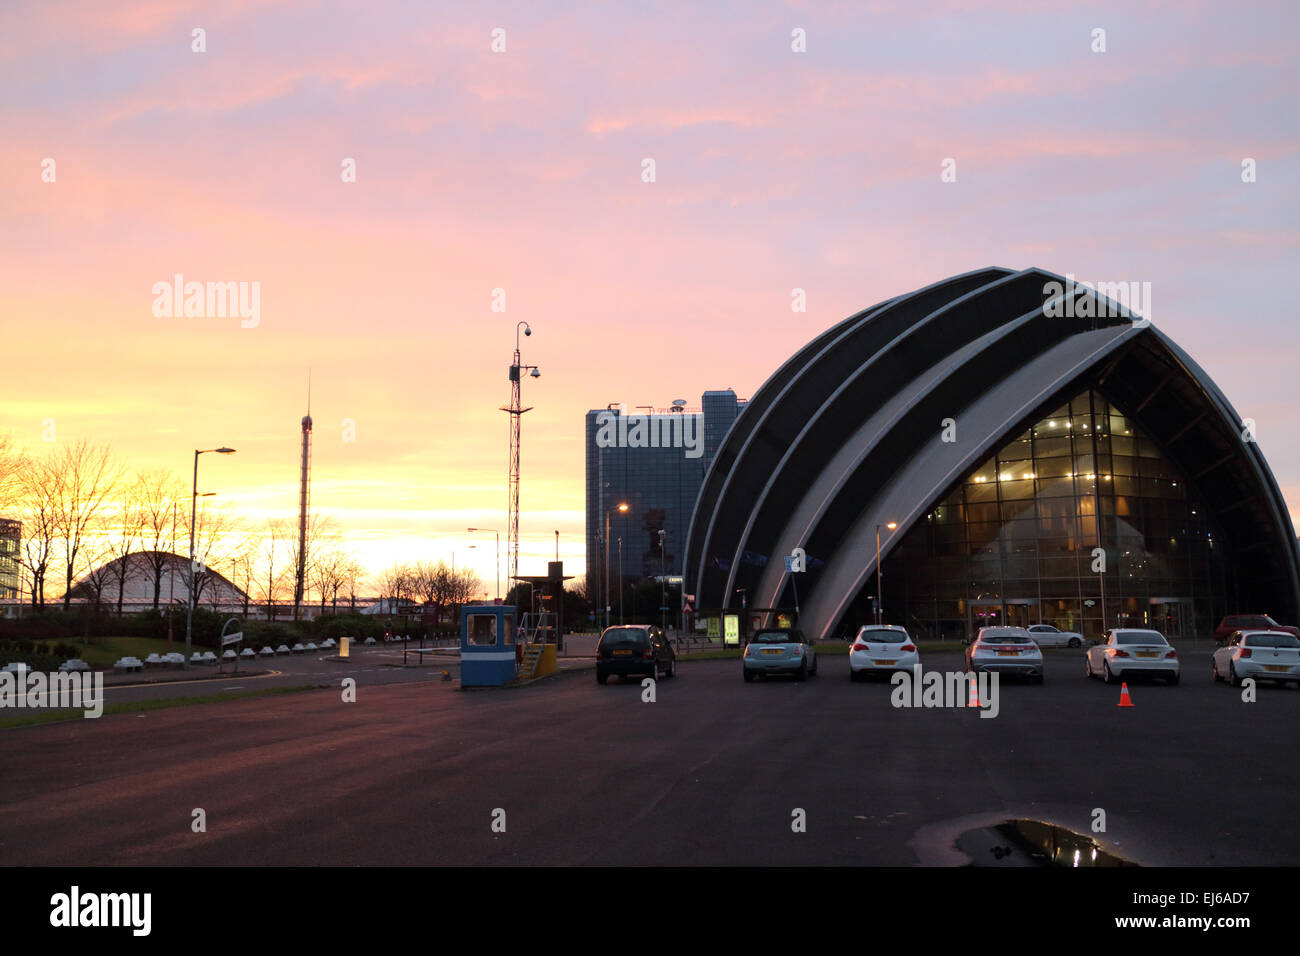 clyde auditorium at the secc scottish exhibition and conference centre at dusk Glasgow Scotland uk Stock Photo